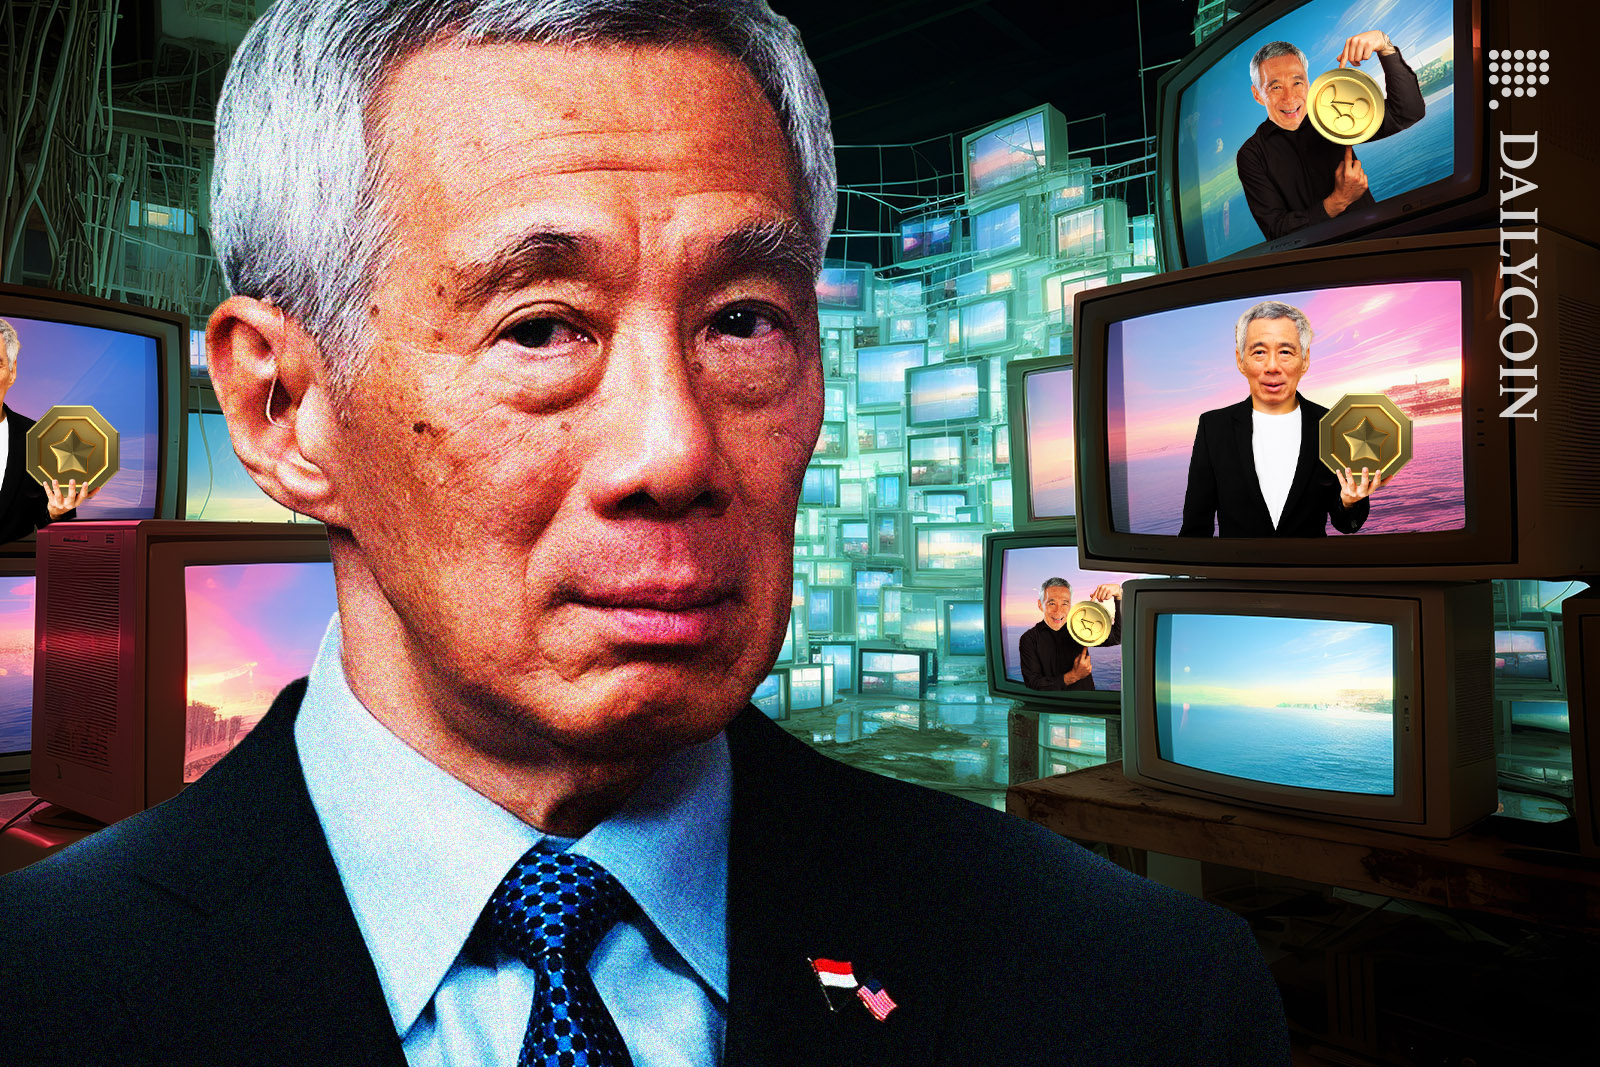 Singapore Prime Minister Lee Hsien Loong not impressed with the fake crypto promos of him.